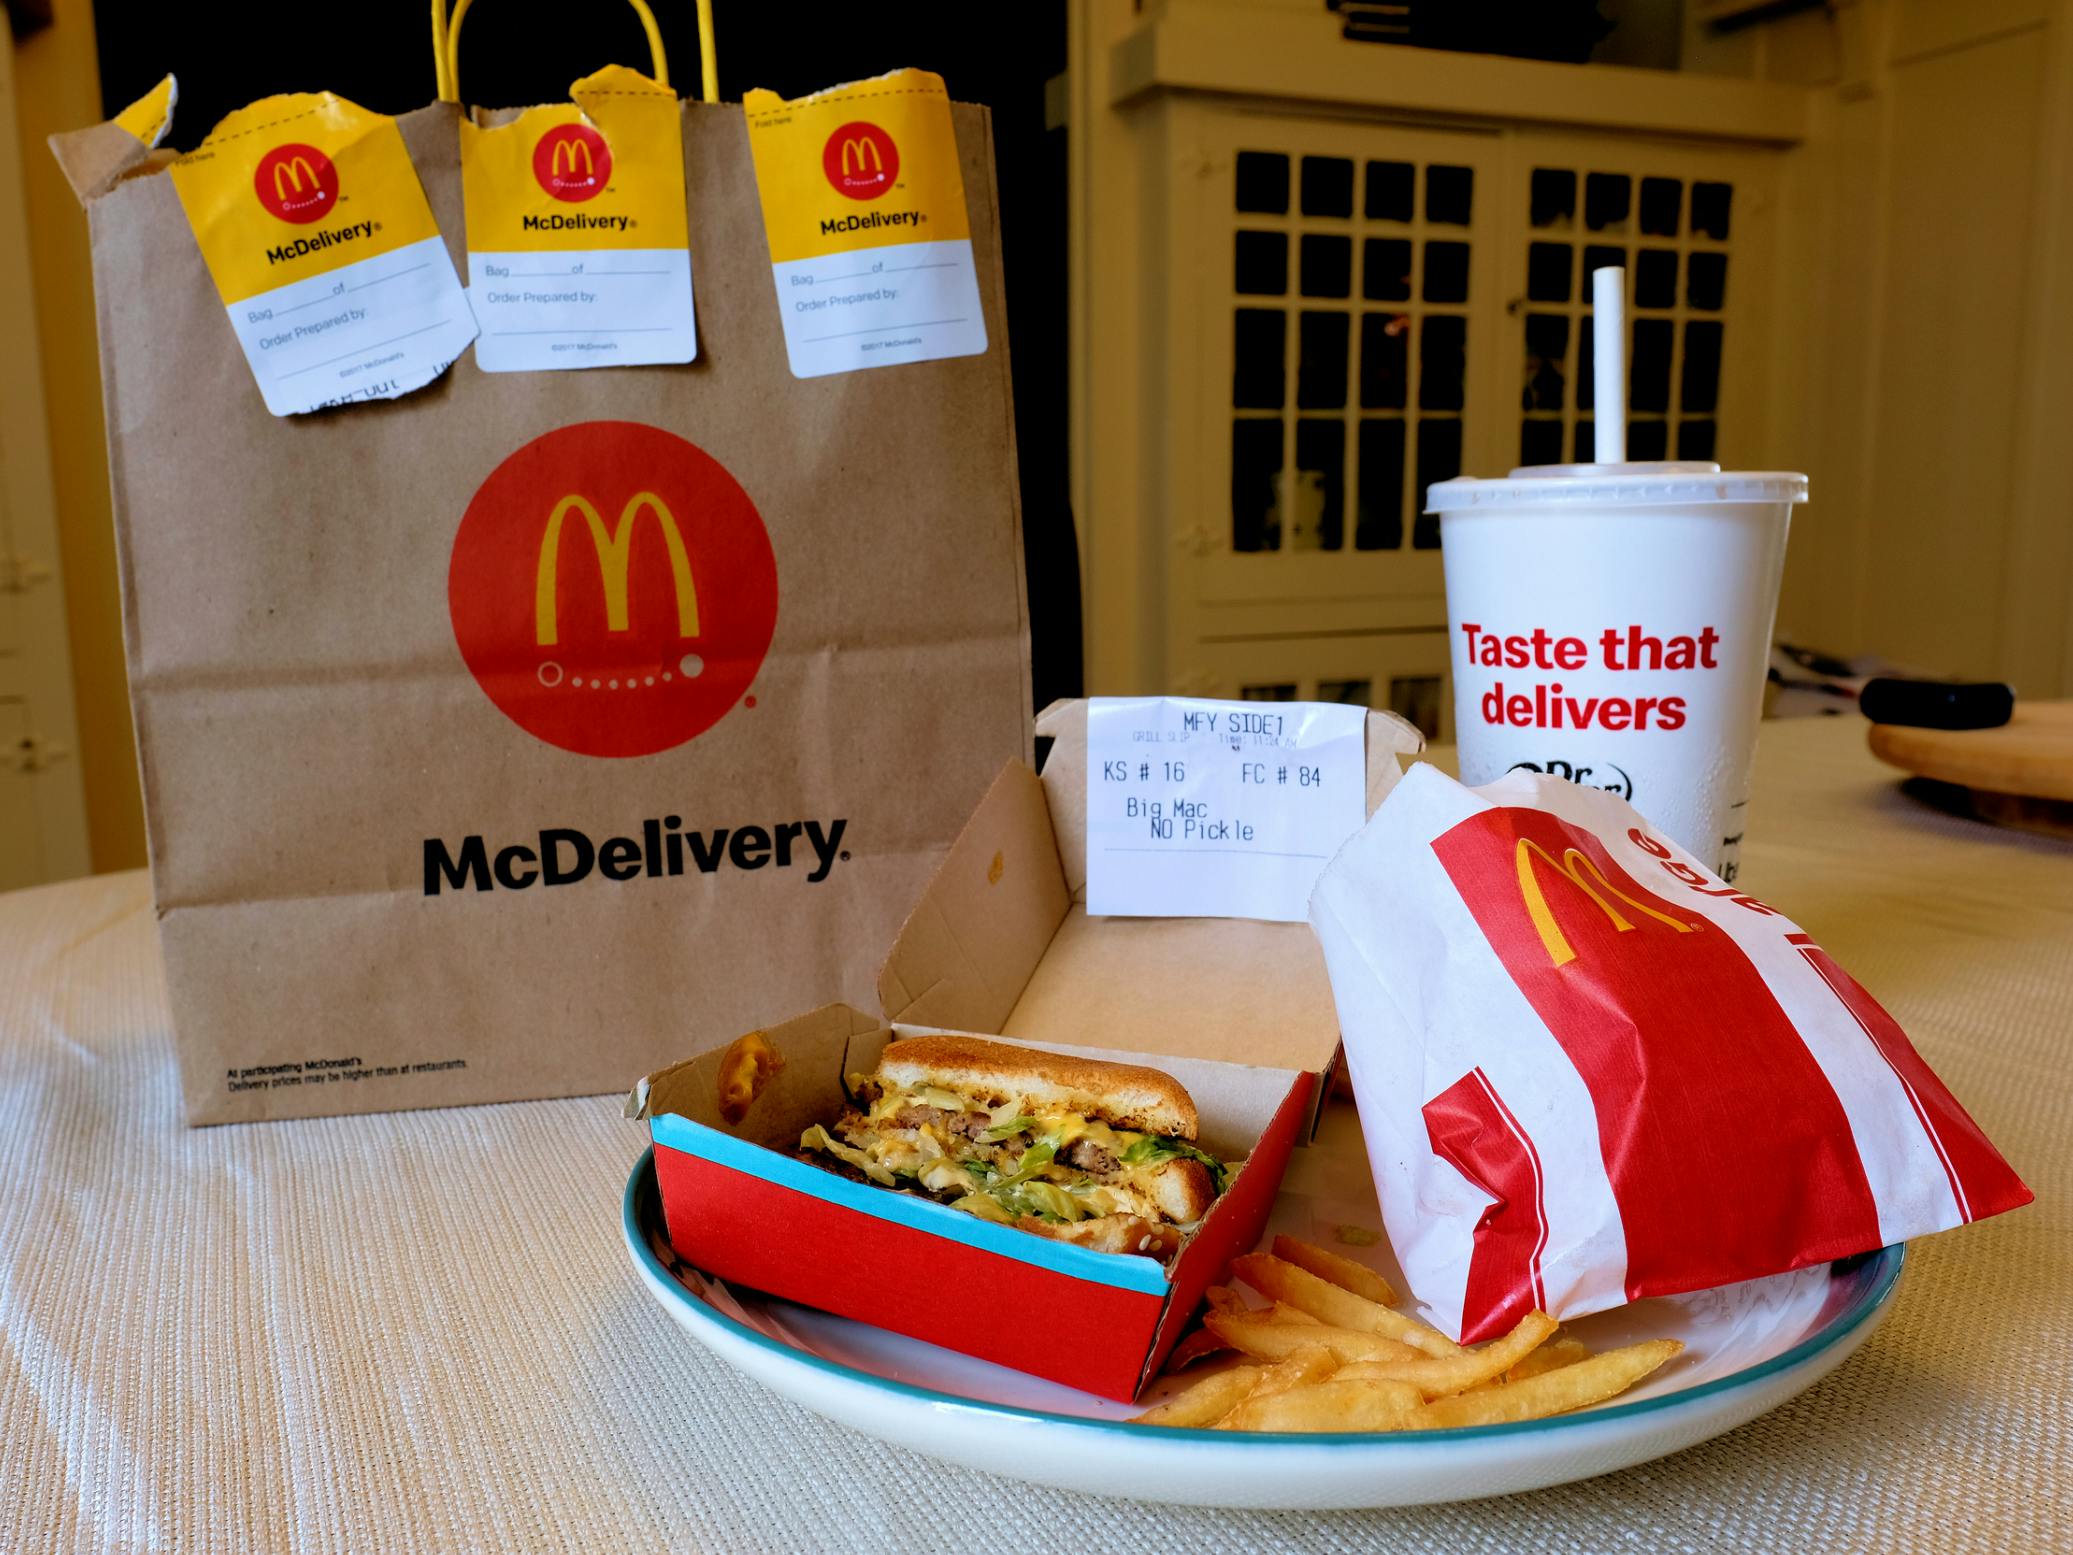 A Big Mac meal with fries and a drink sitting on a table next to a McDonald's McDelivery bag from Uber Eats.